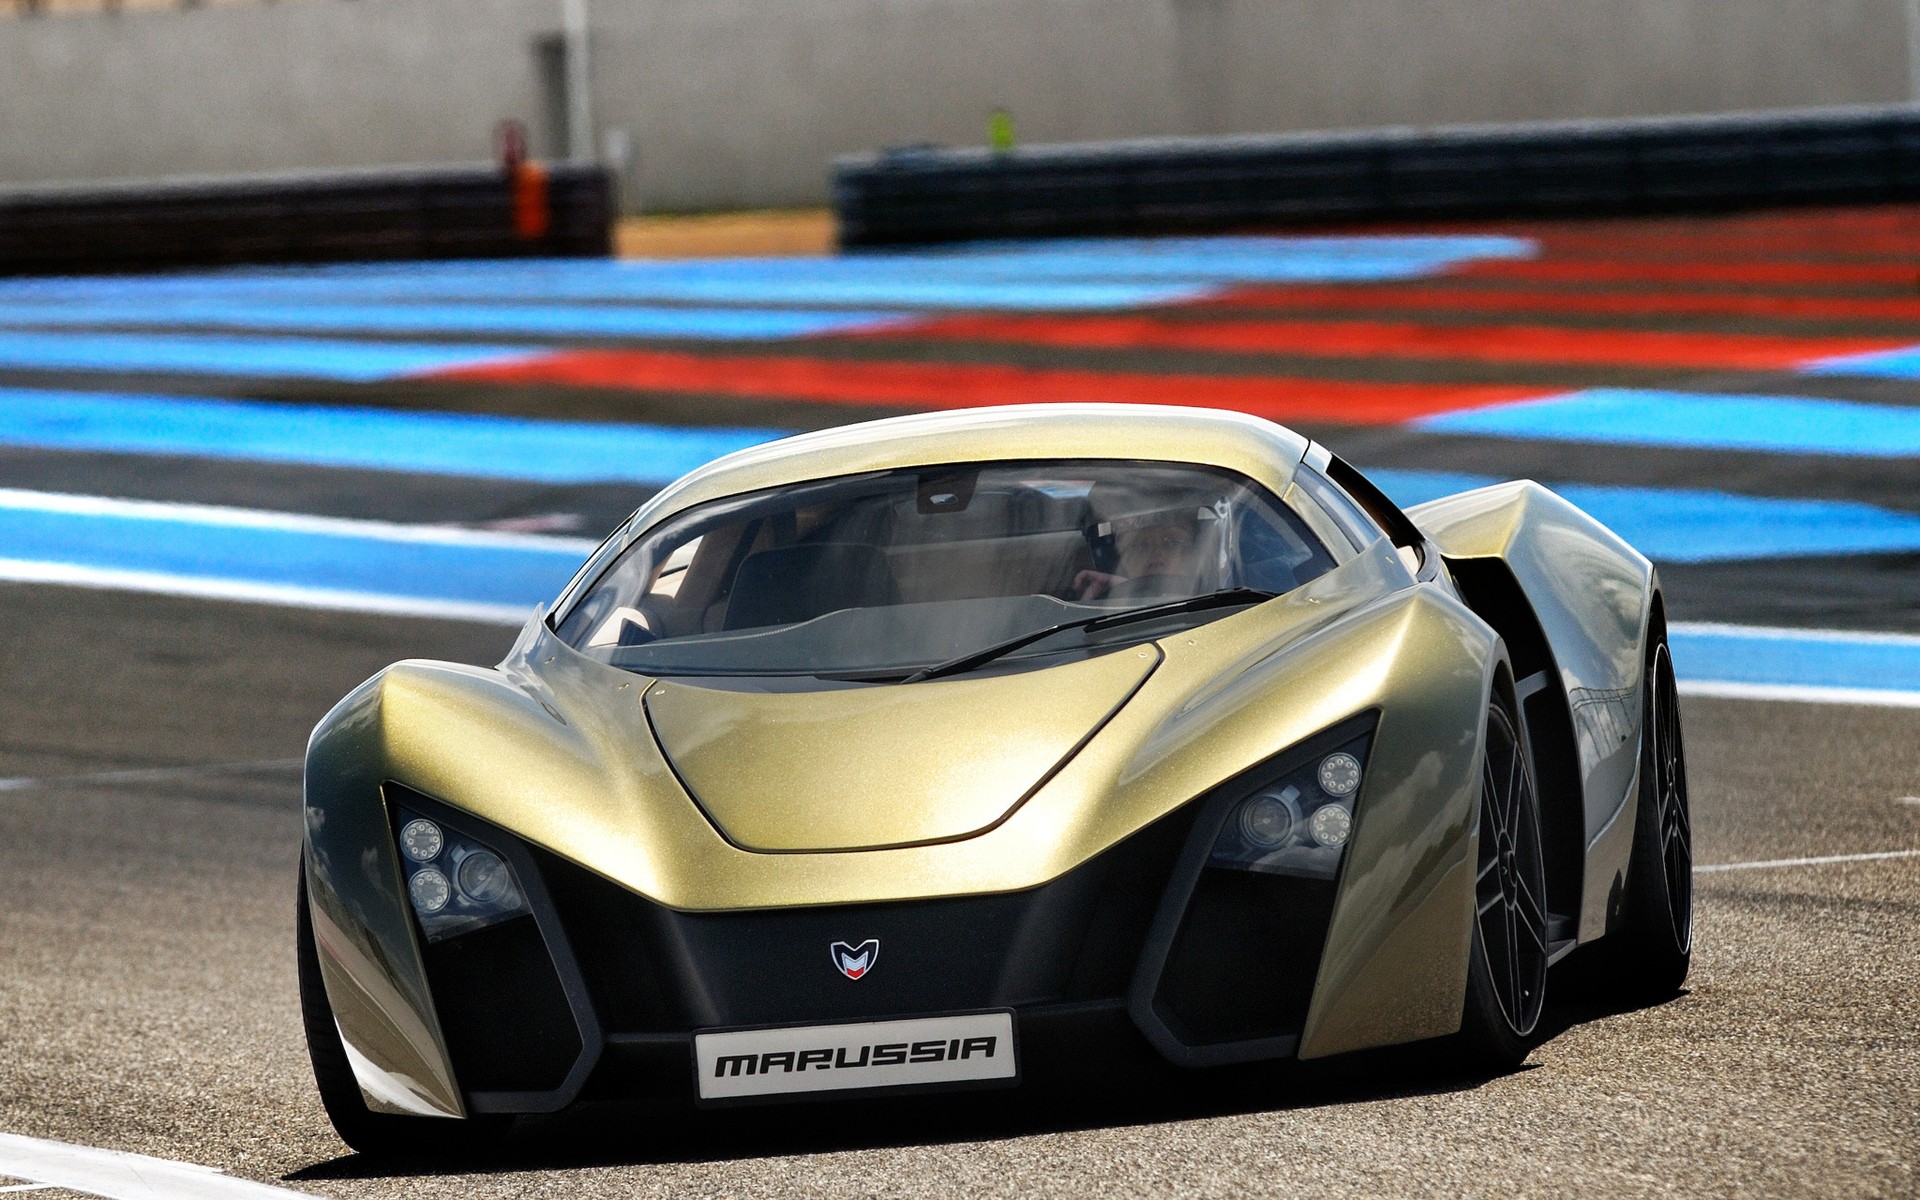 The Marussia B2 Wallpaper iPhone